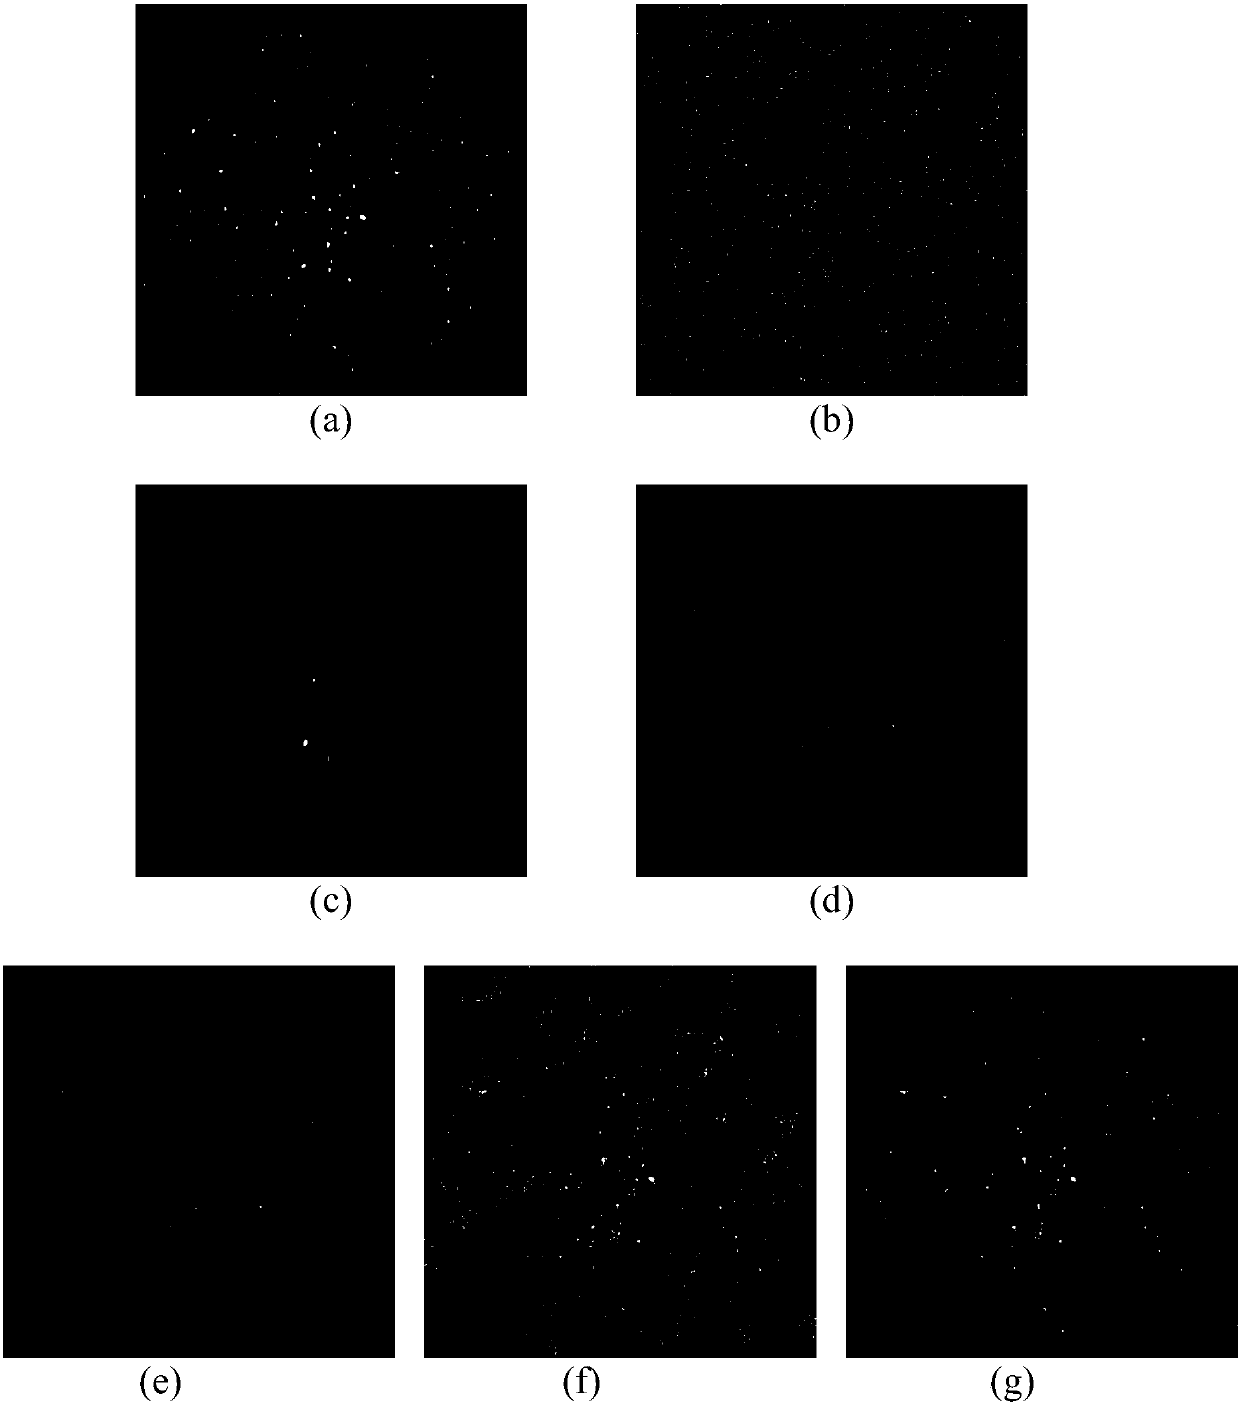 Image denoising method combining Bayes layered learning with space-spectrum combined priori